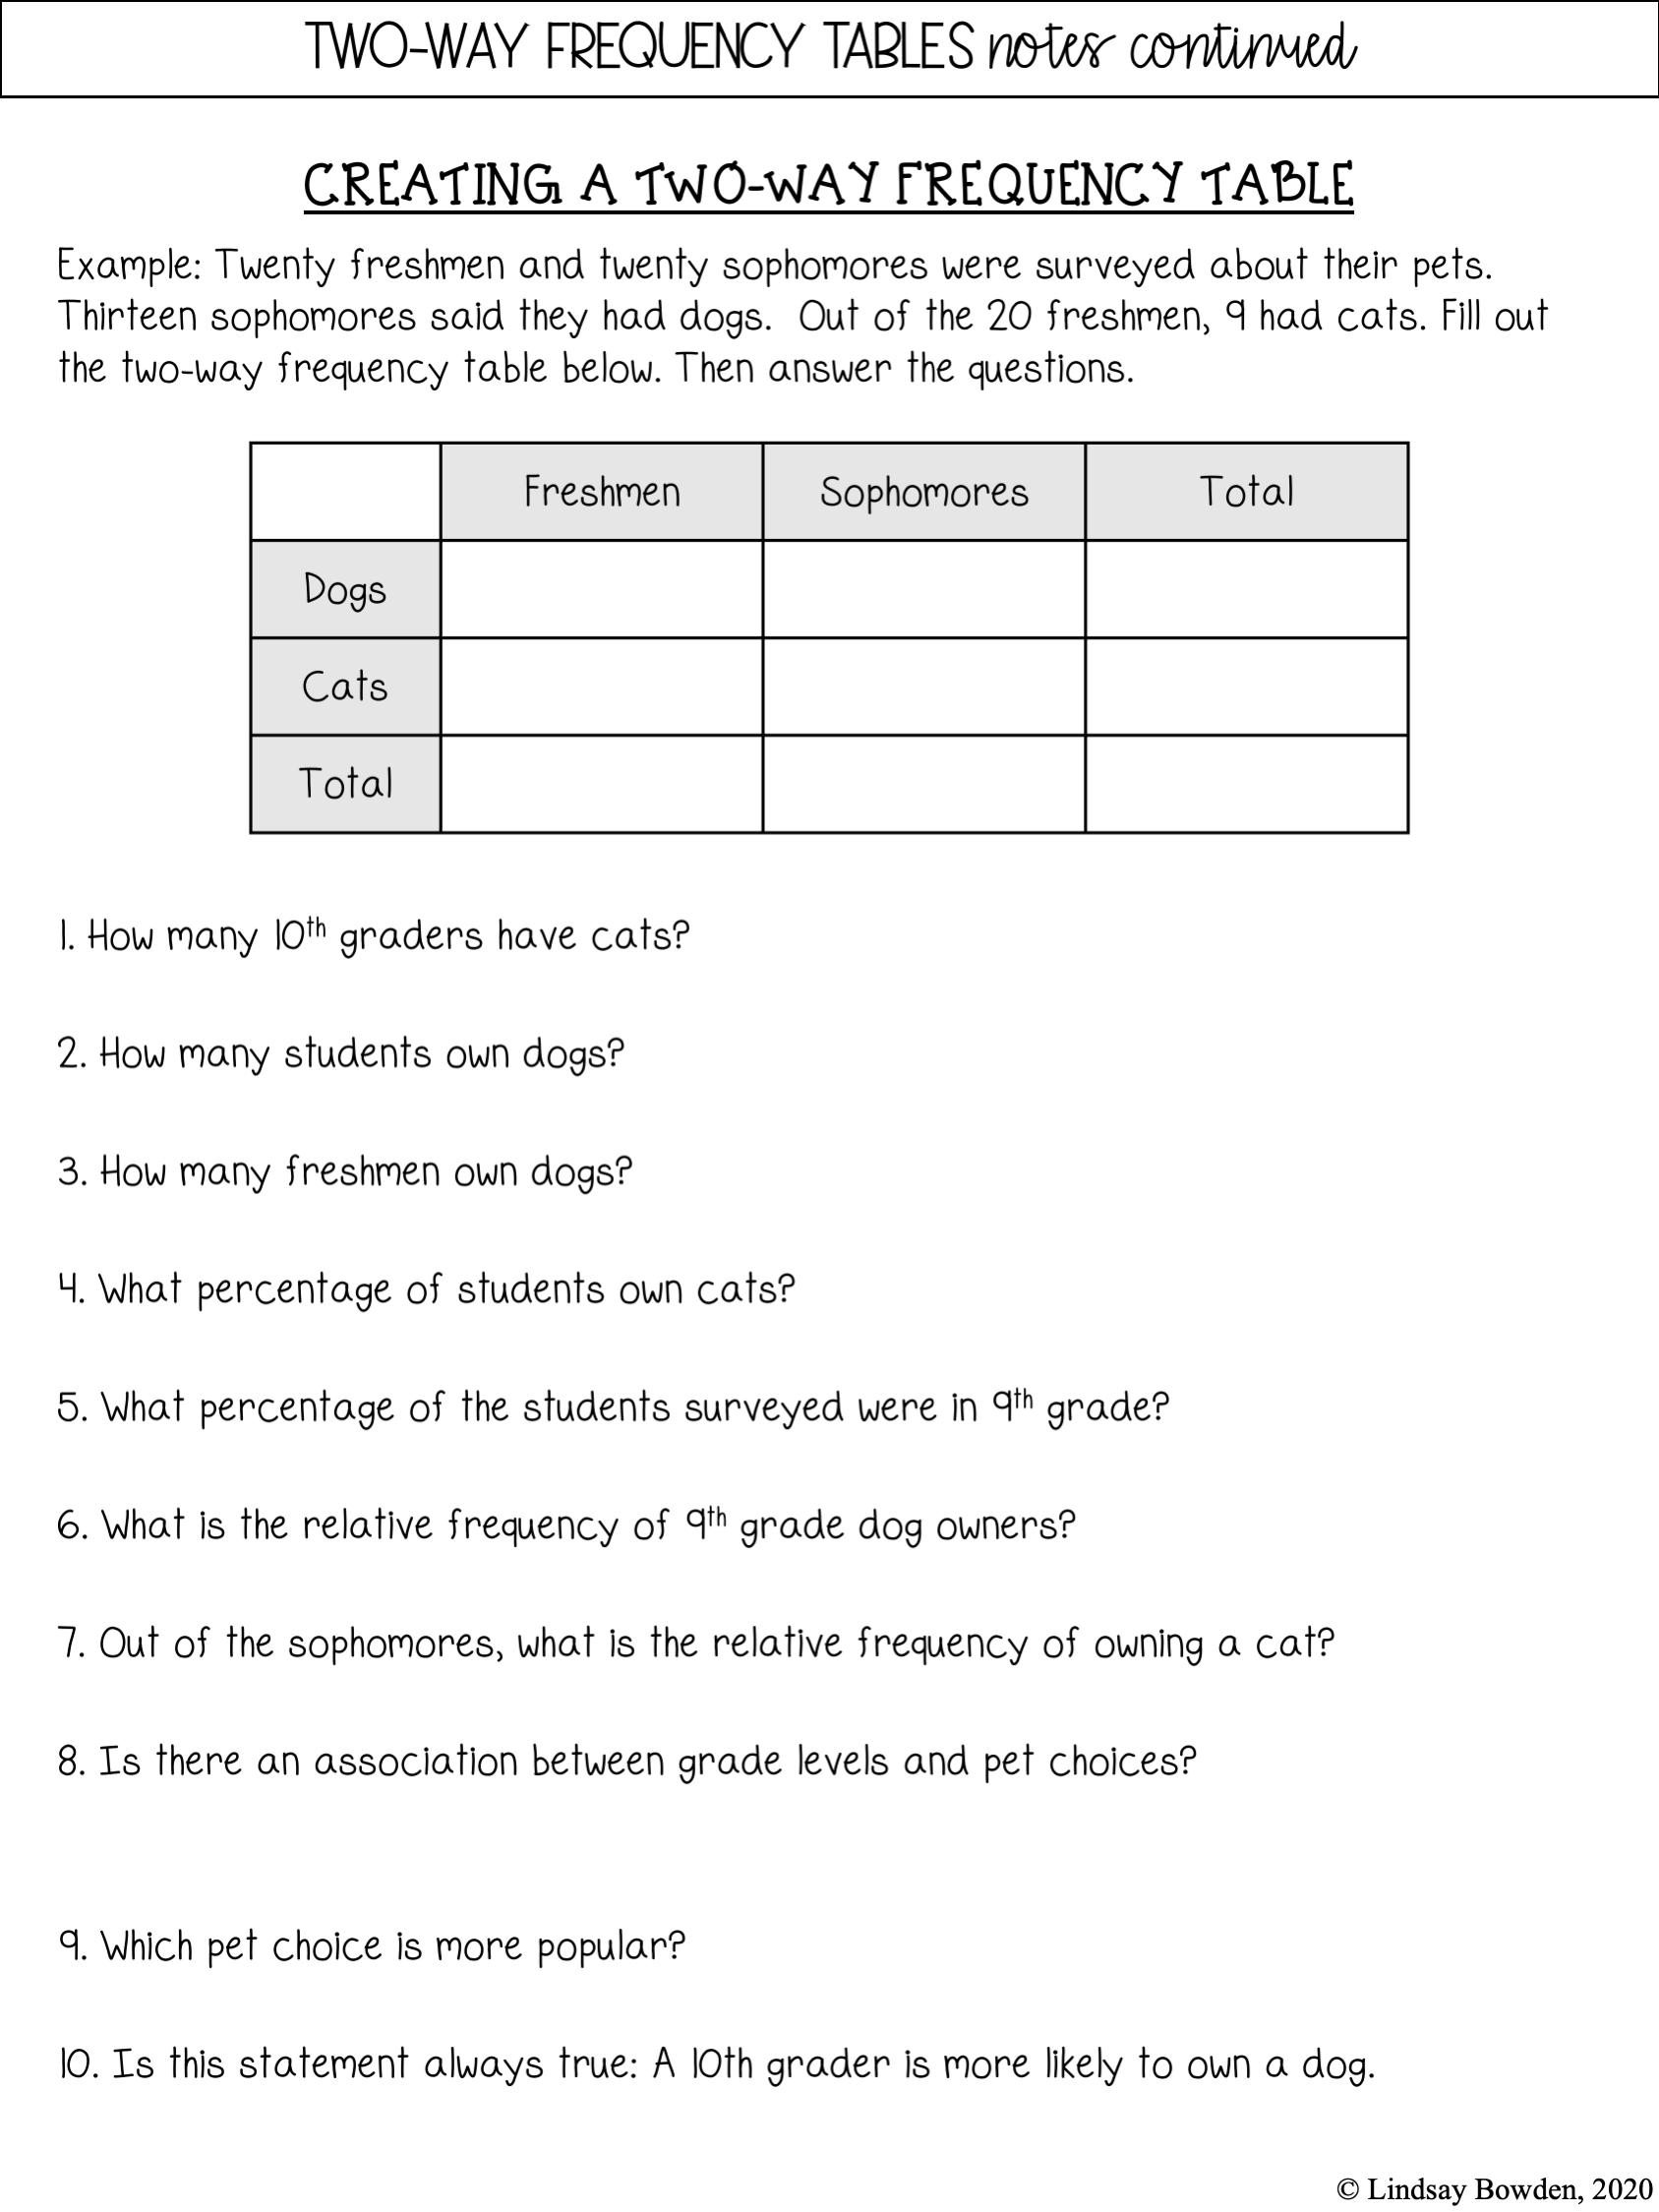 Two-Way Frequency Tables Notes and Worksheets - Lindsay Bowden Throughout Two Way Frequency Tables Worksheet